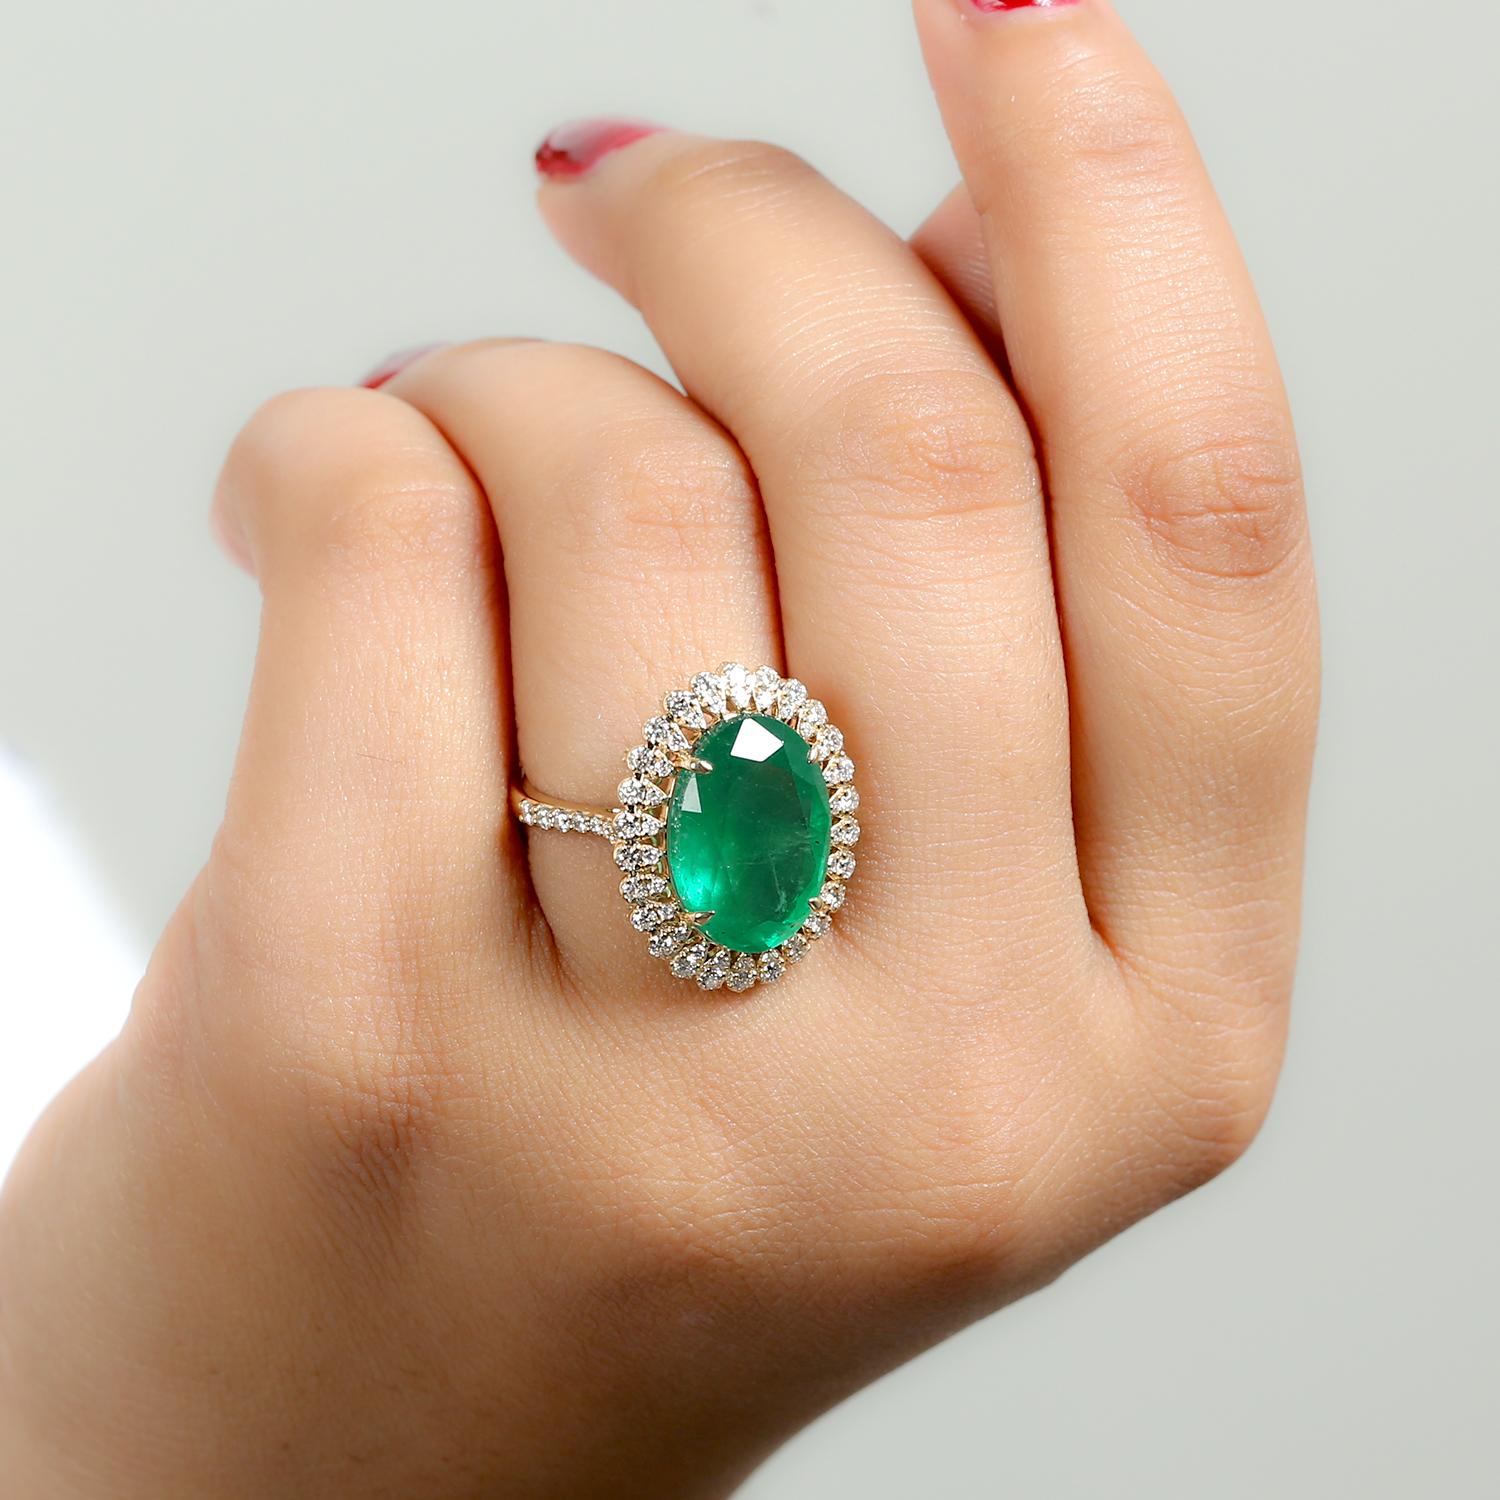 This ring has been meticulously crafted from 14-karat gold.  It is hand set with 9.1 carats emerald & .98 carats of sparkling diamonds. 

The ring is a size 7 and may be resized to larger or smaller upon request. 
FOLLOW  MEGHNA JEWELS storefront to